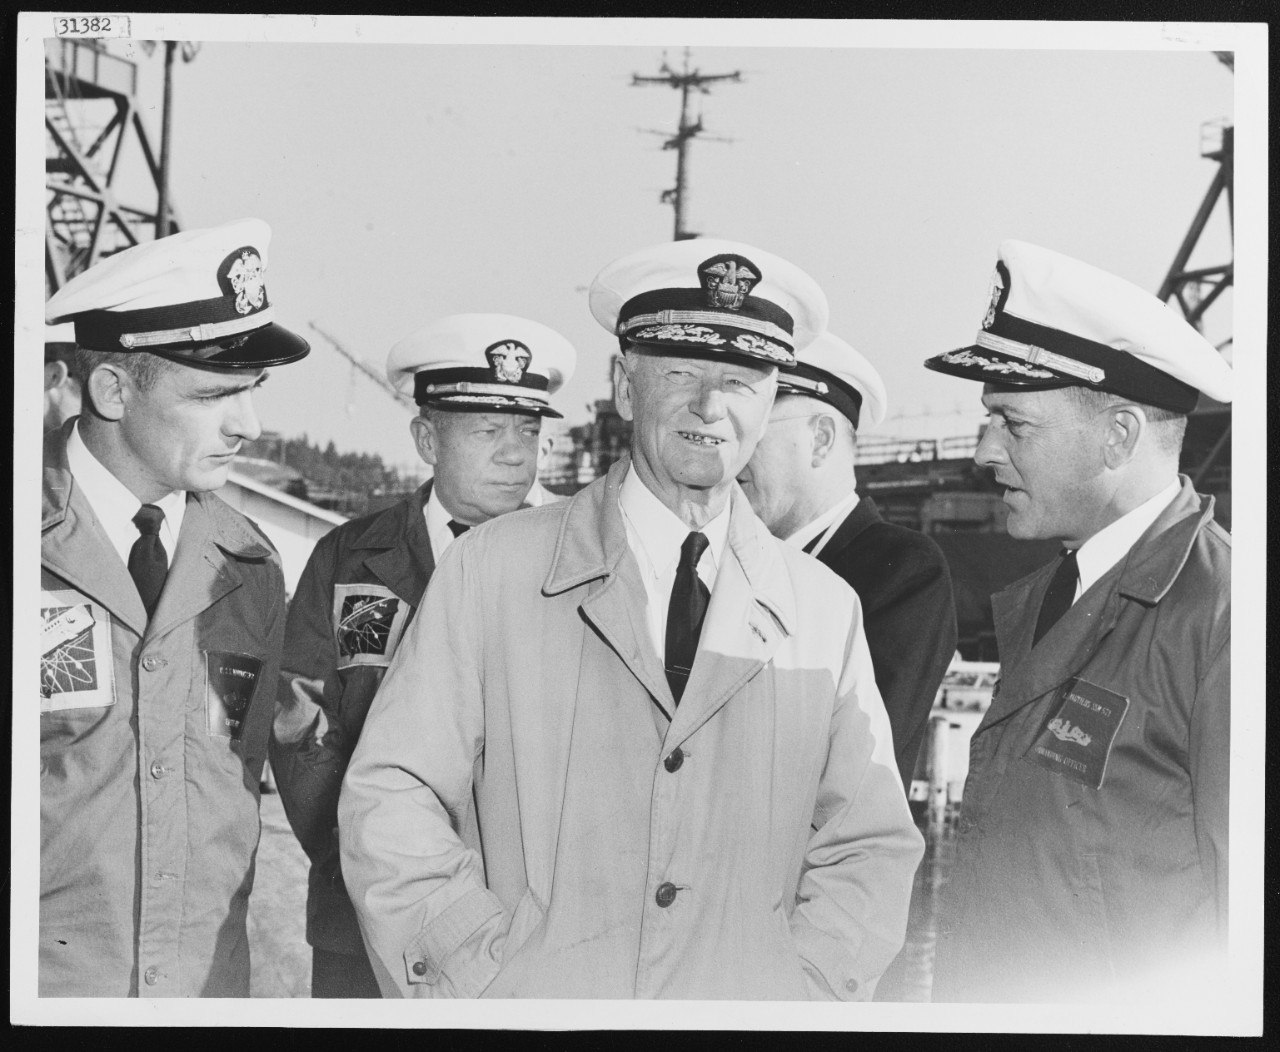 Fleet Admiral C.W. Nimitz, USN Chats with the Commander of USS NAUTILUS (SSN-571)